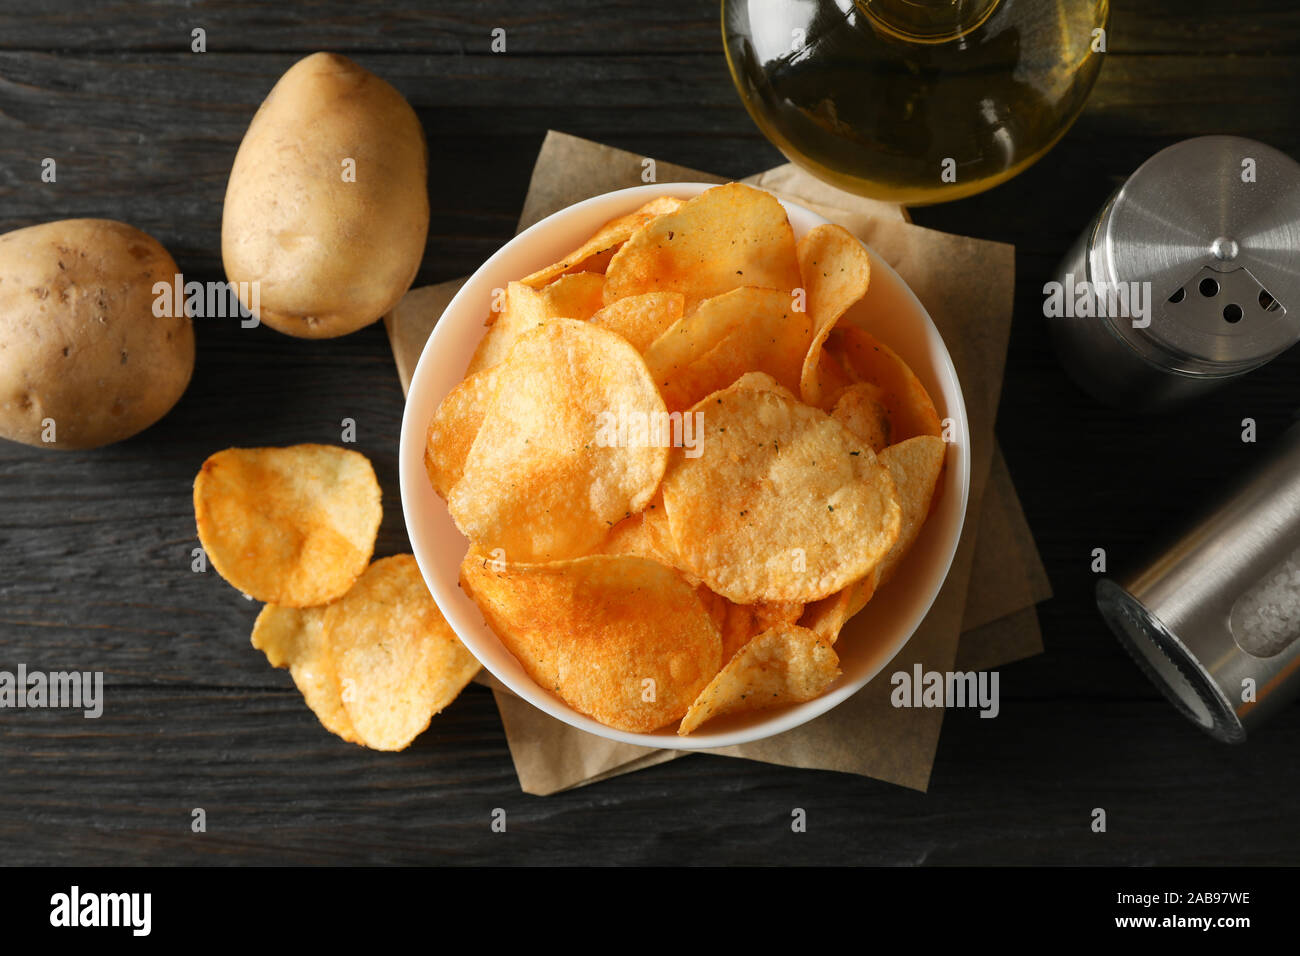 Potato chips in a bowl on craft paper. Potato, spice, olive oil on wooden background, closeup. Top view Stock Photo